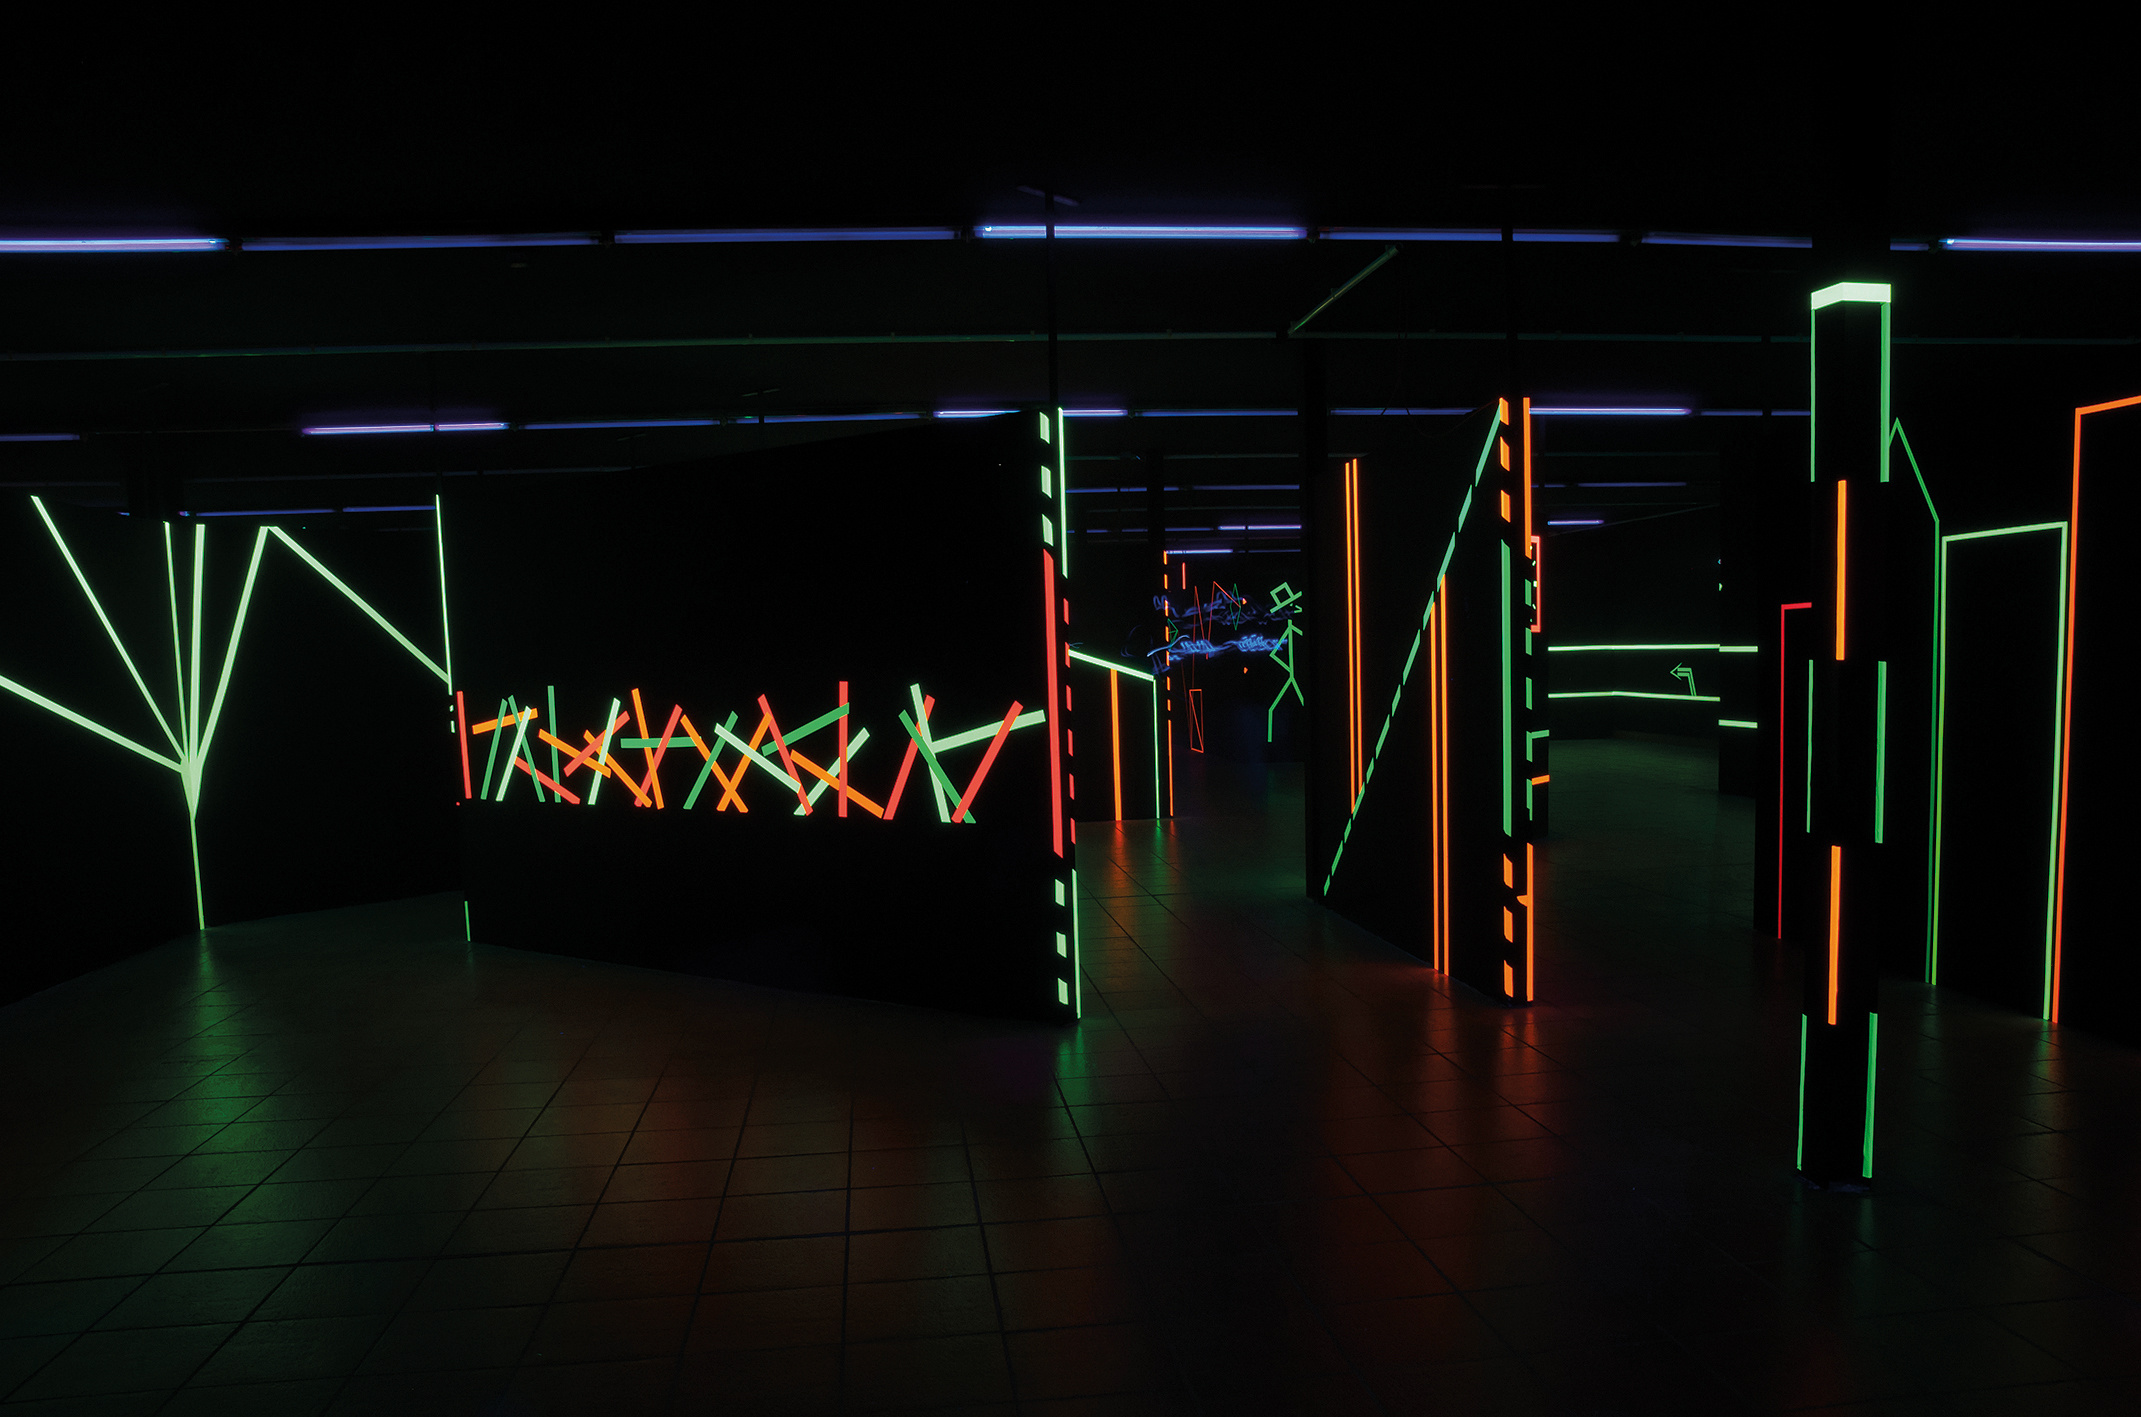 Laser Tag: An indoor arena for a popular shooting game, Adventure sports. 2150x1420 HD Wallpaper.